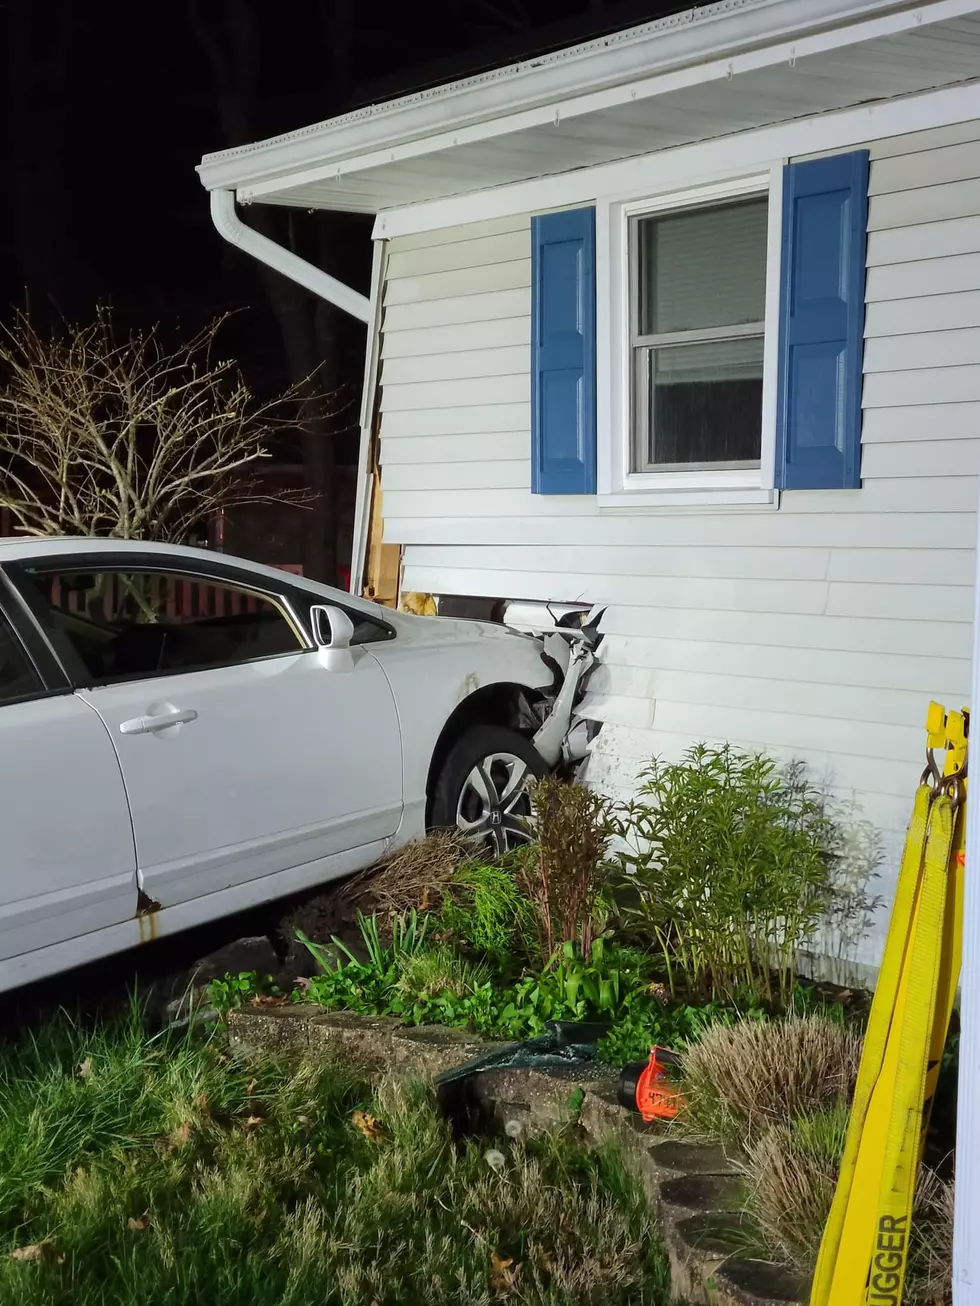 Beach Haven West, NJ teen charged after crashing car into house in Manahawkin, NJ